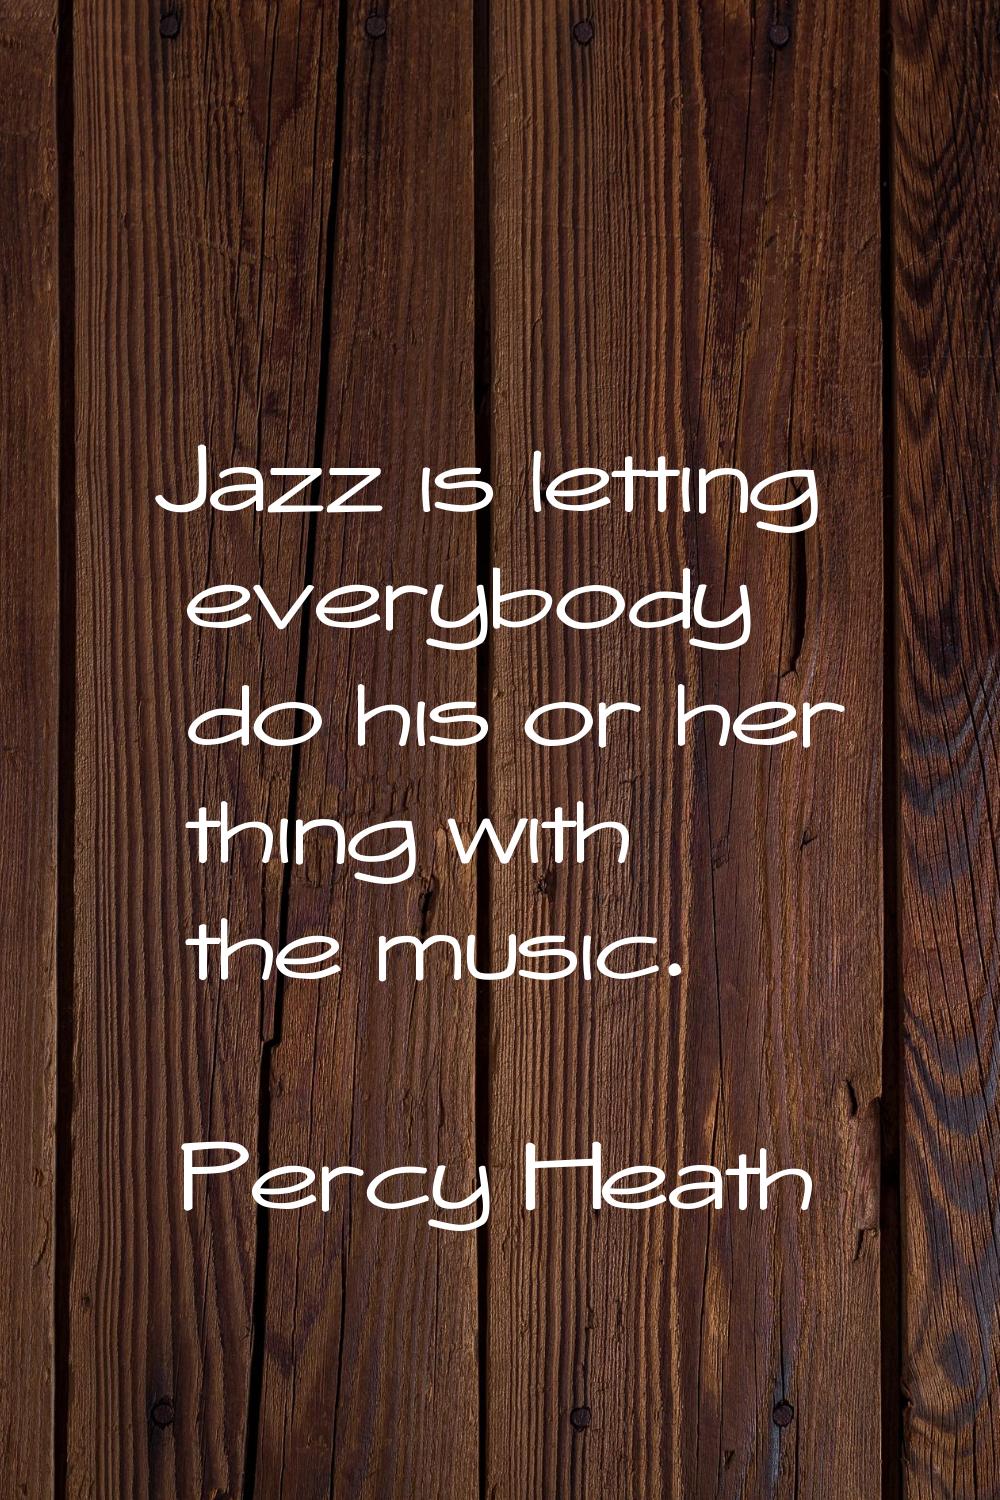 Jazz is letting everybody do his or her thing with the music.